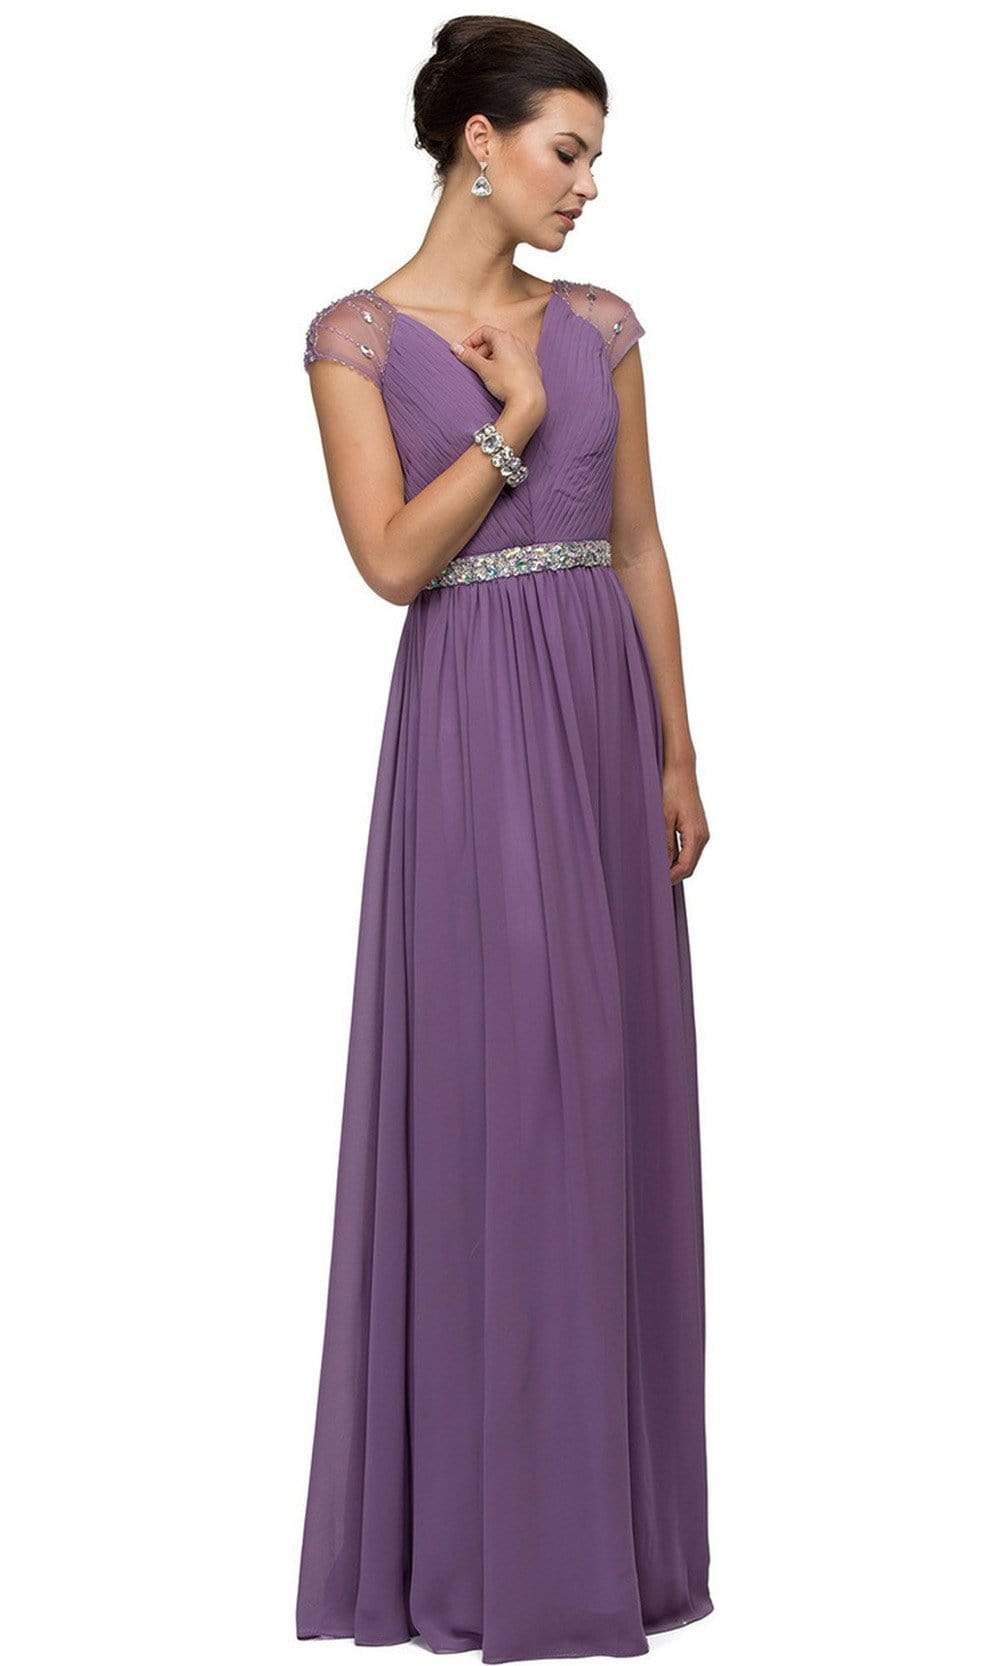 Dancing Queen - 9182 Illusion Cap Sleeve Pleated V-Neck Chiffon Evening Dress Evening Dresses XS / Dusty Lilac